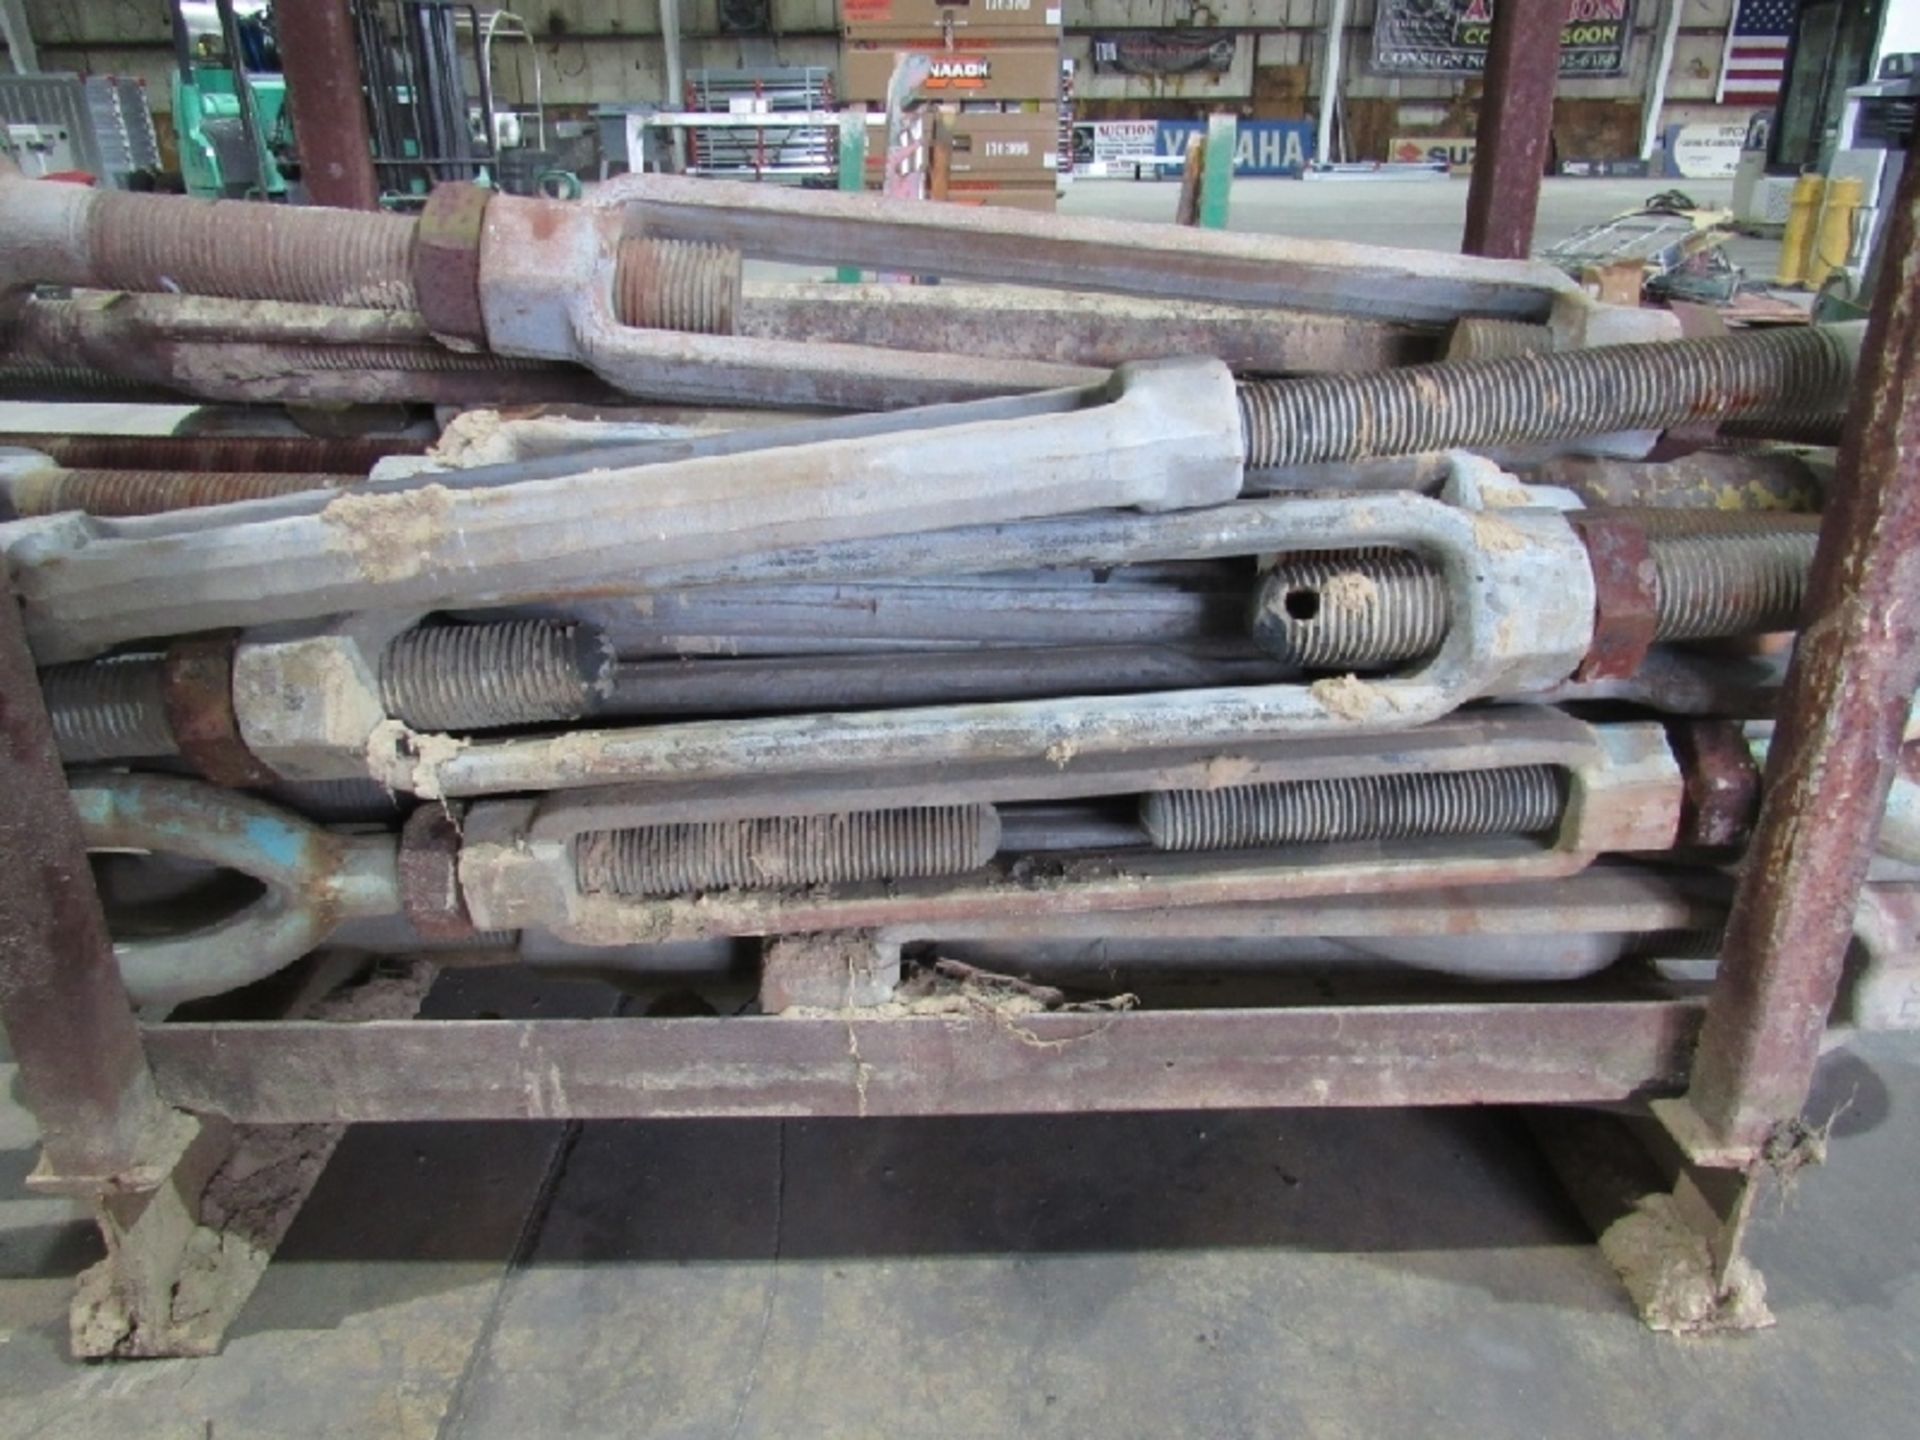 (approx qty - 20) Turnbuckles and Rack- ***Located in Chattanooga, TN*** MFR - Unknown Sizes Range - Bild 7 aus 8